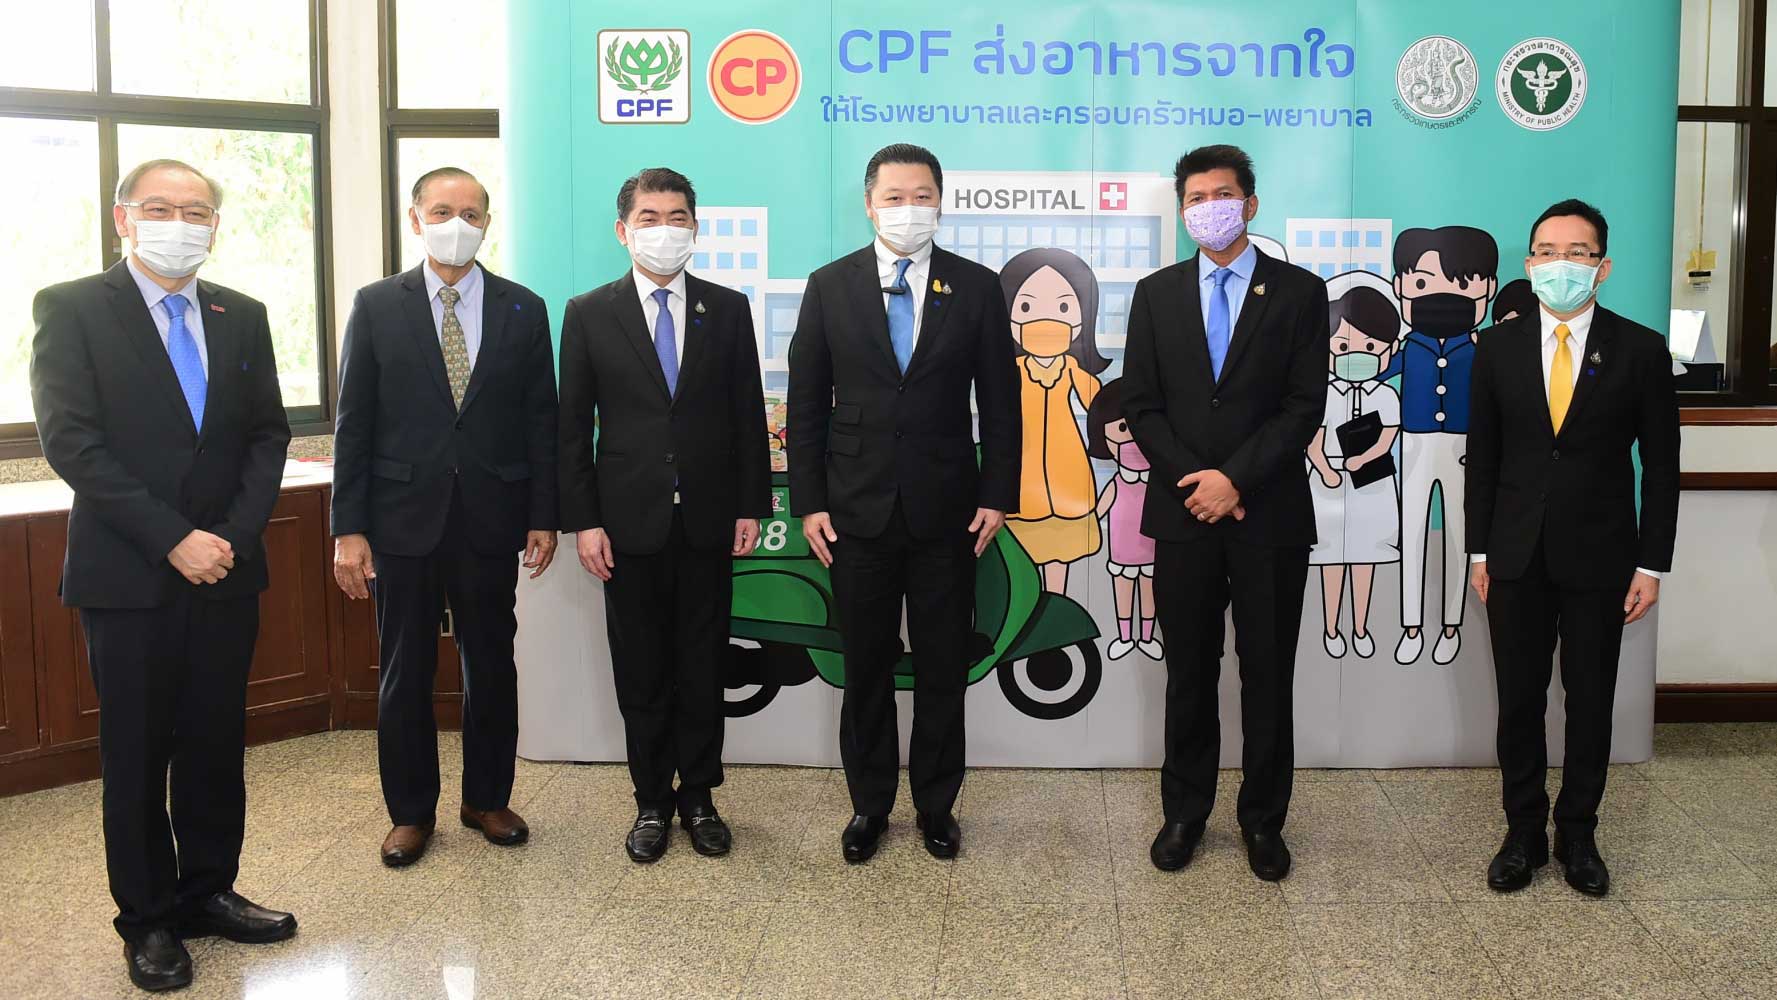 CPF extends food supports to families of doctors and nurses in the frontline